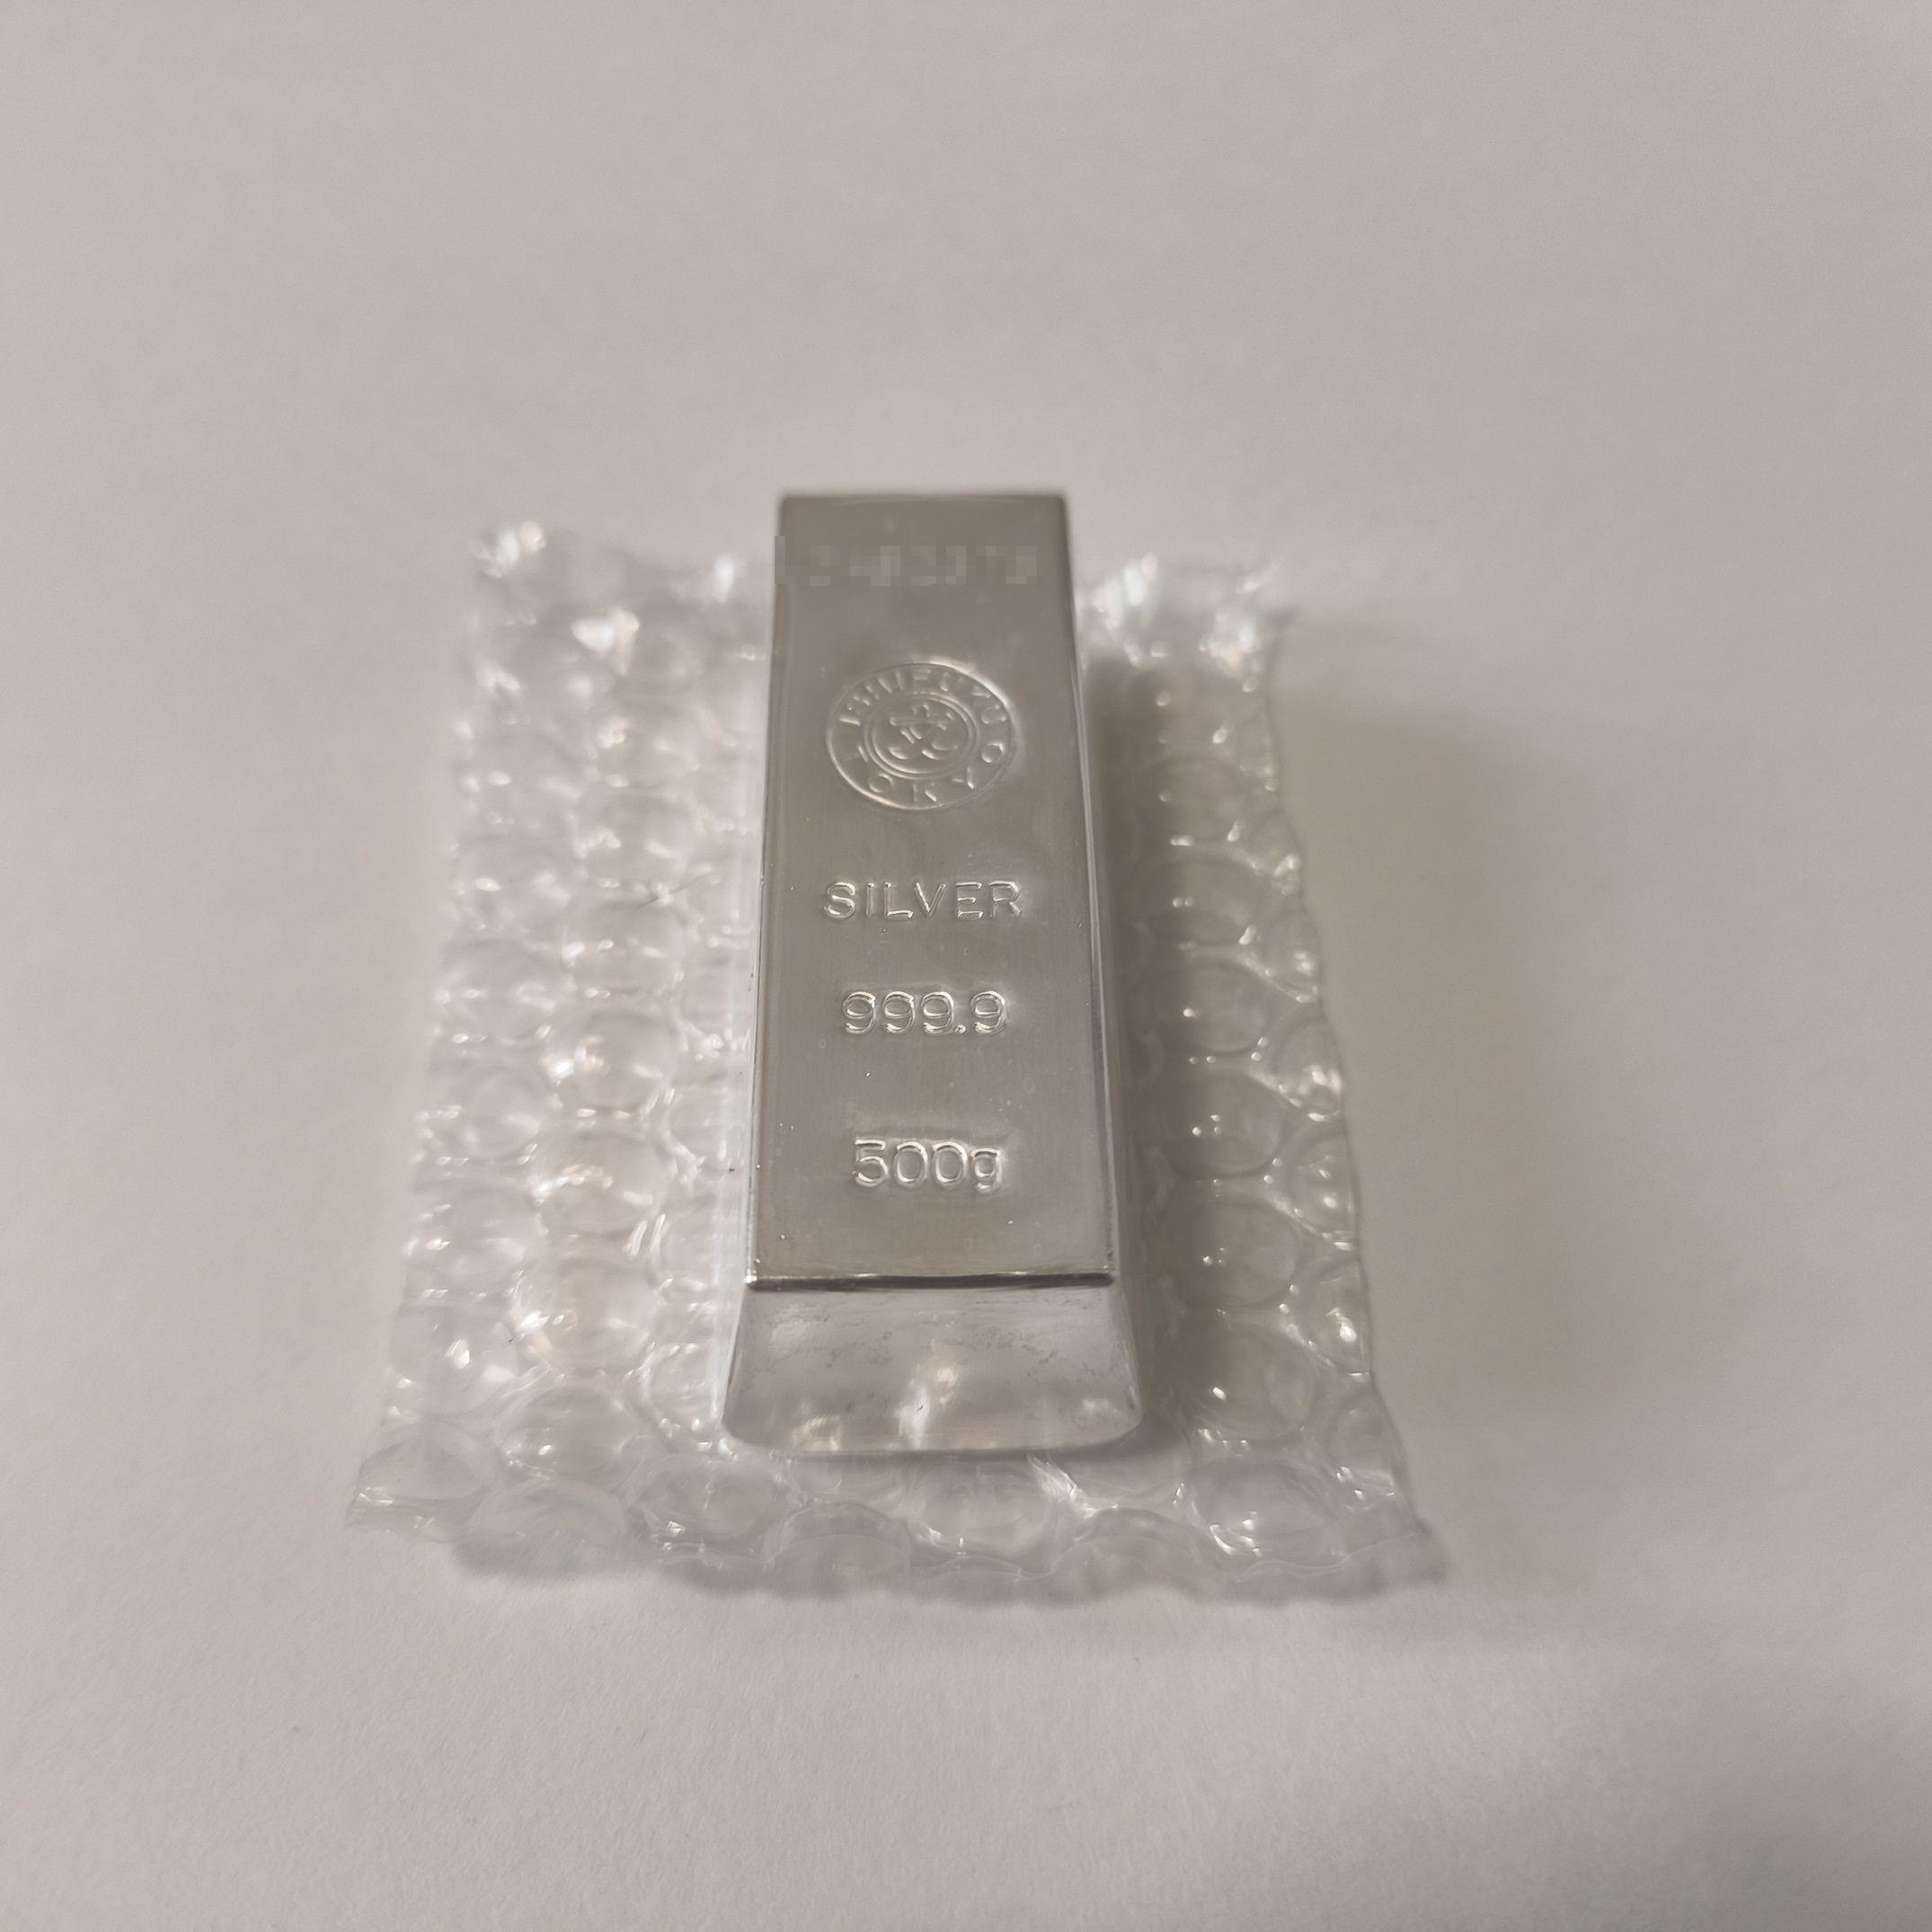  stone luck metal industry 500g silver metal silver in go toy ngotoLBMA